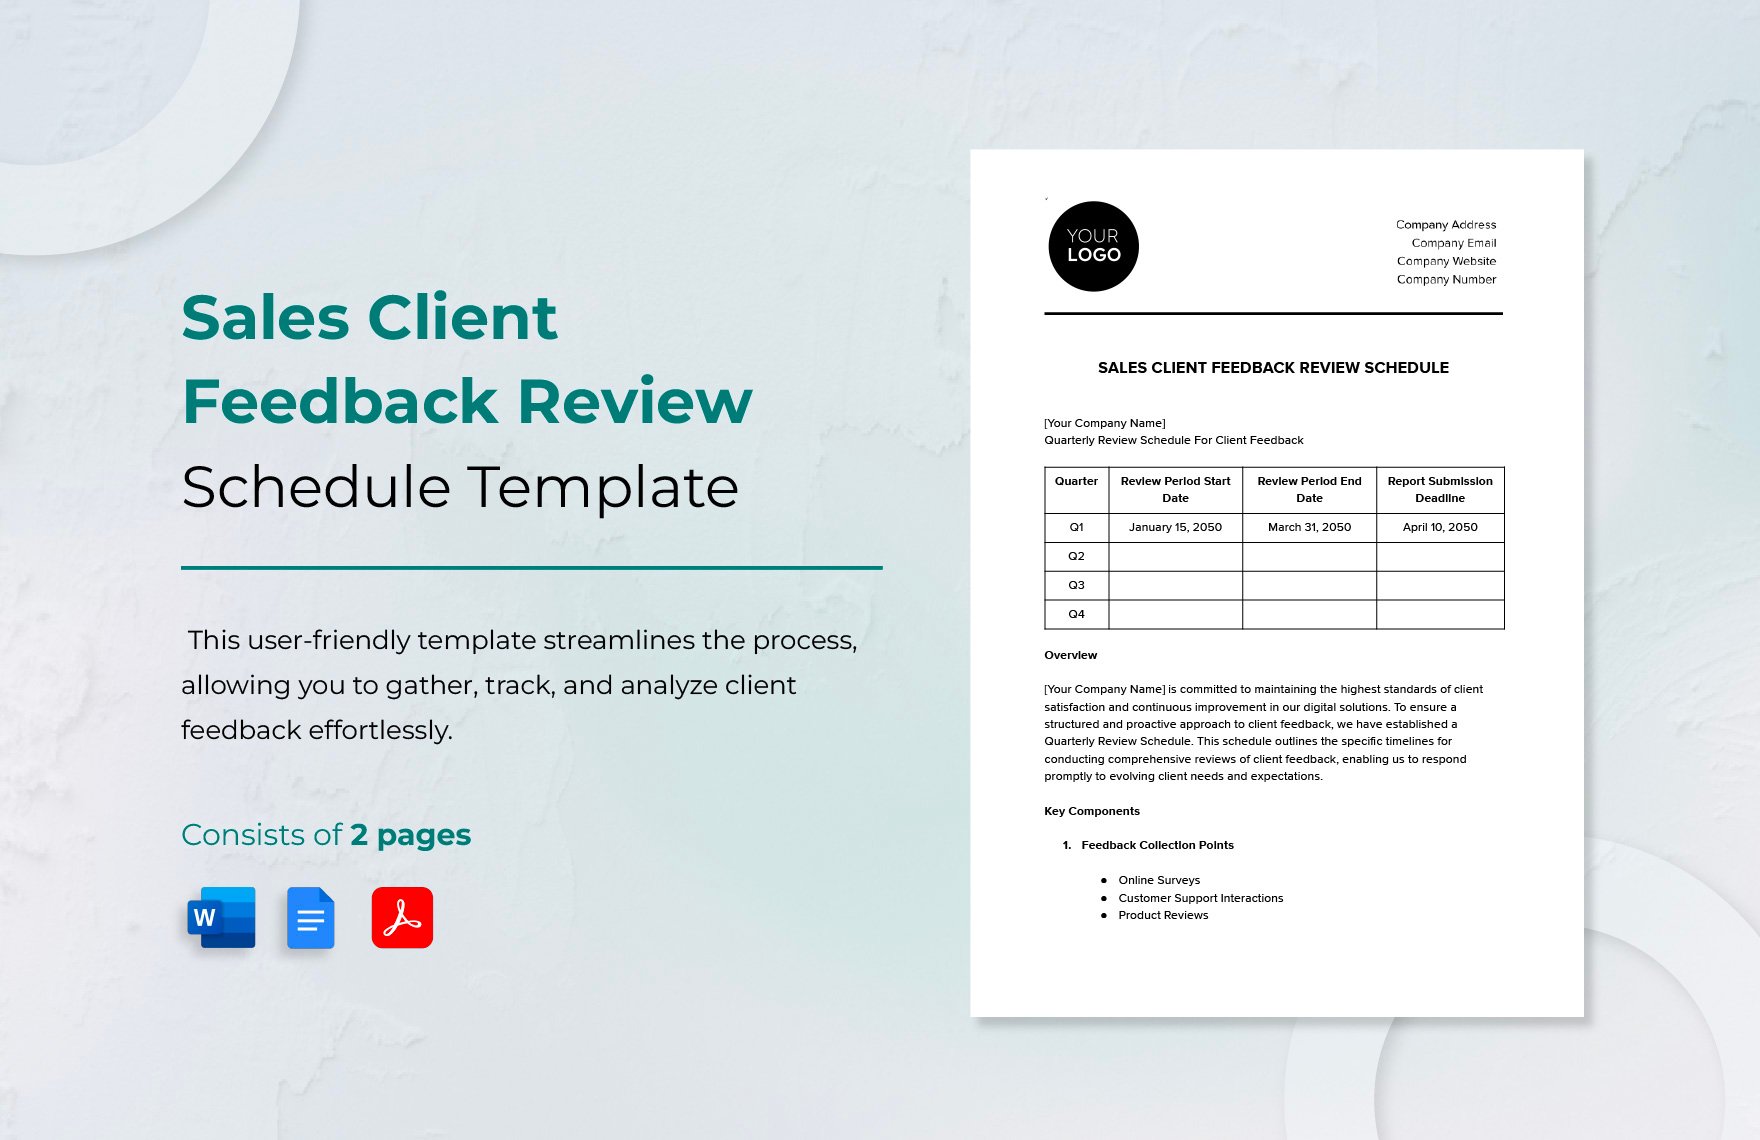 Sales Client Feedback Review Schedule Template in Word, Google Docs, PDF